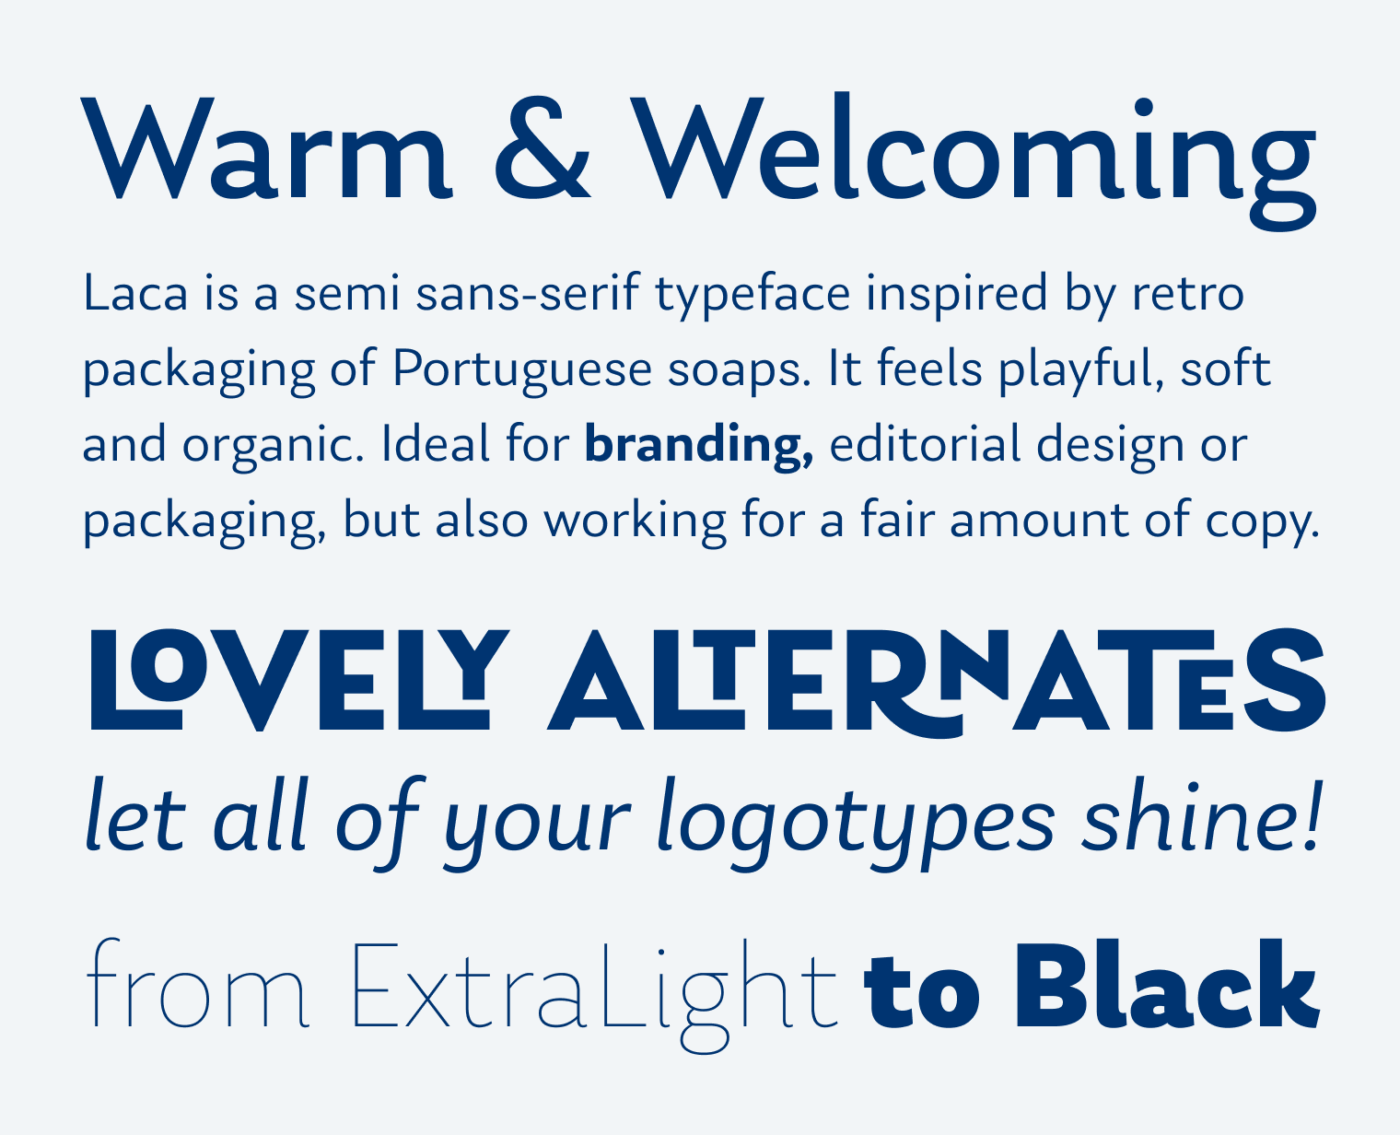 Warm & Welcoming Laca is a semi sans-serif typeface inspired by retro packaging of Portuguese soaps. It feels playful, soft and organic. Ideal for branding, editorial design or packaging, but also working for a fair amount of copy. Lovely Alternates let all of your logotypes shine! From ExtraLight to Black.